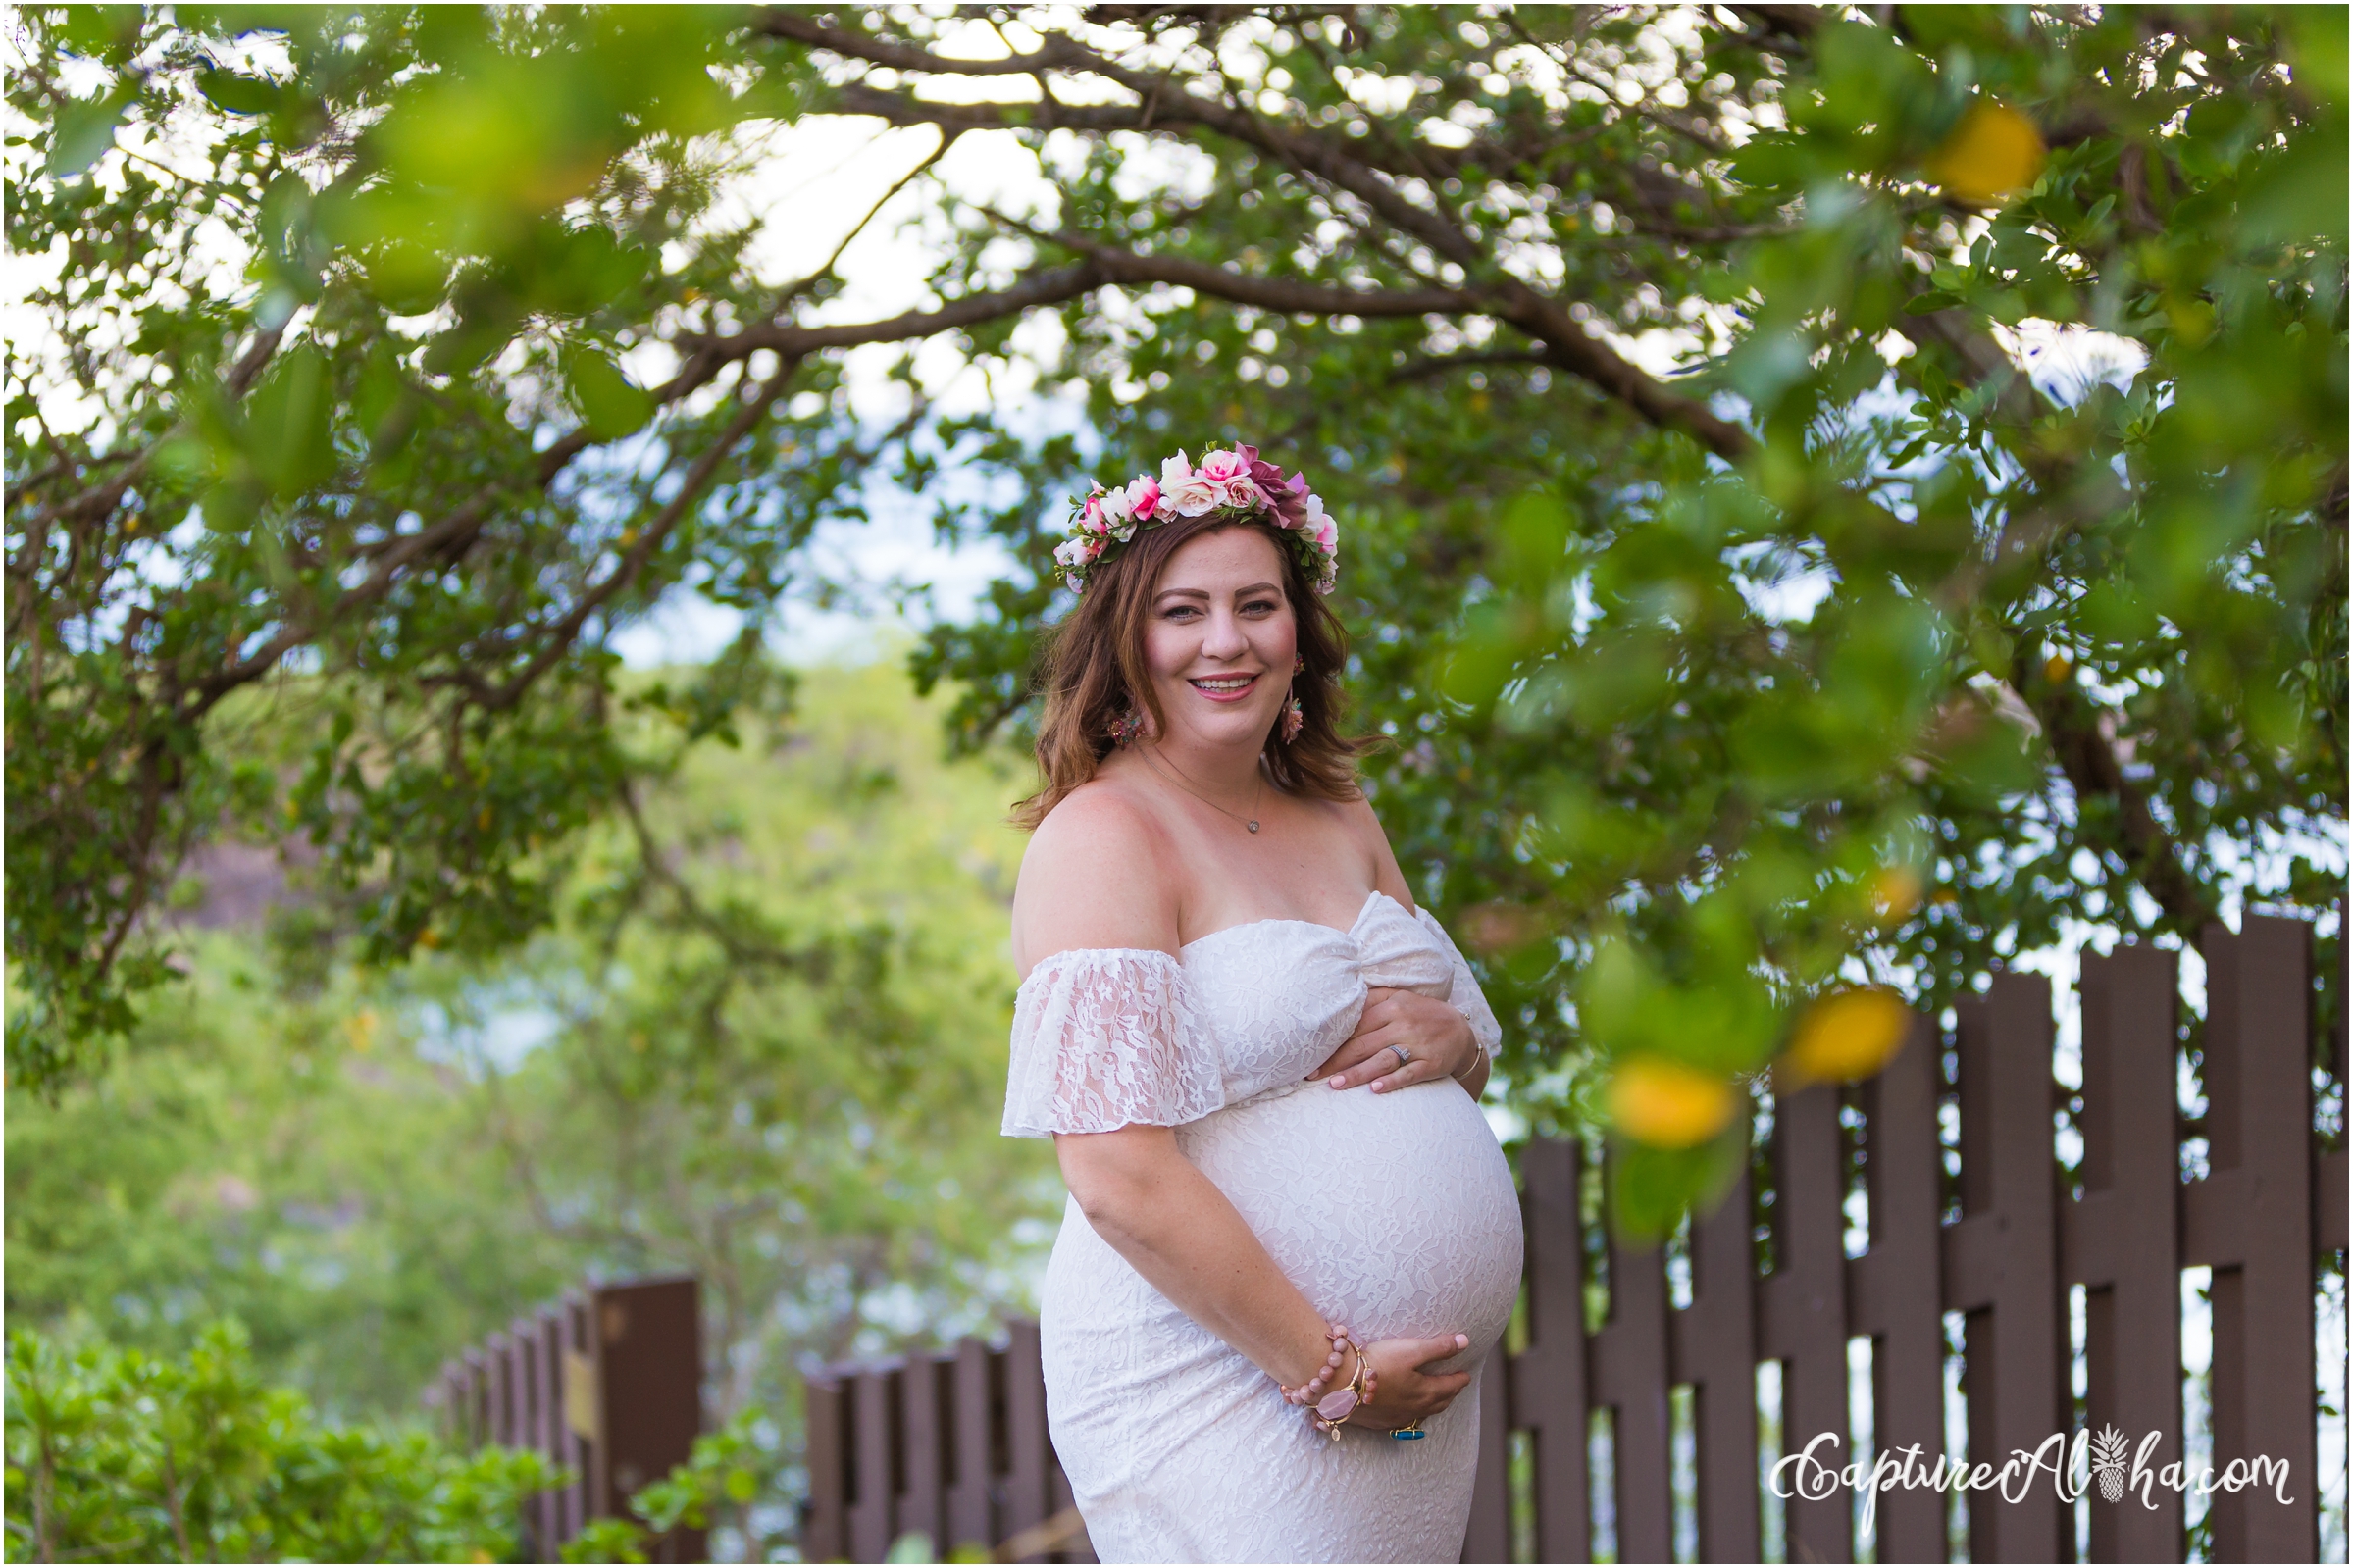 Maui Maternity Photographer at Kapalua Bay with Pregnant woman surrounded by greenery